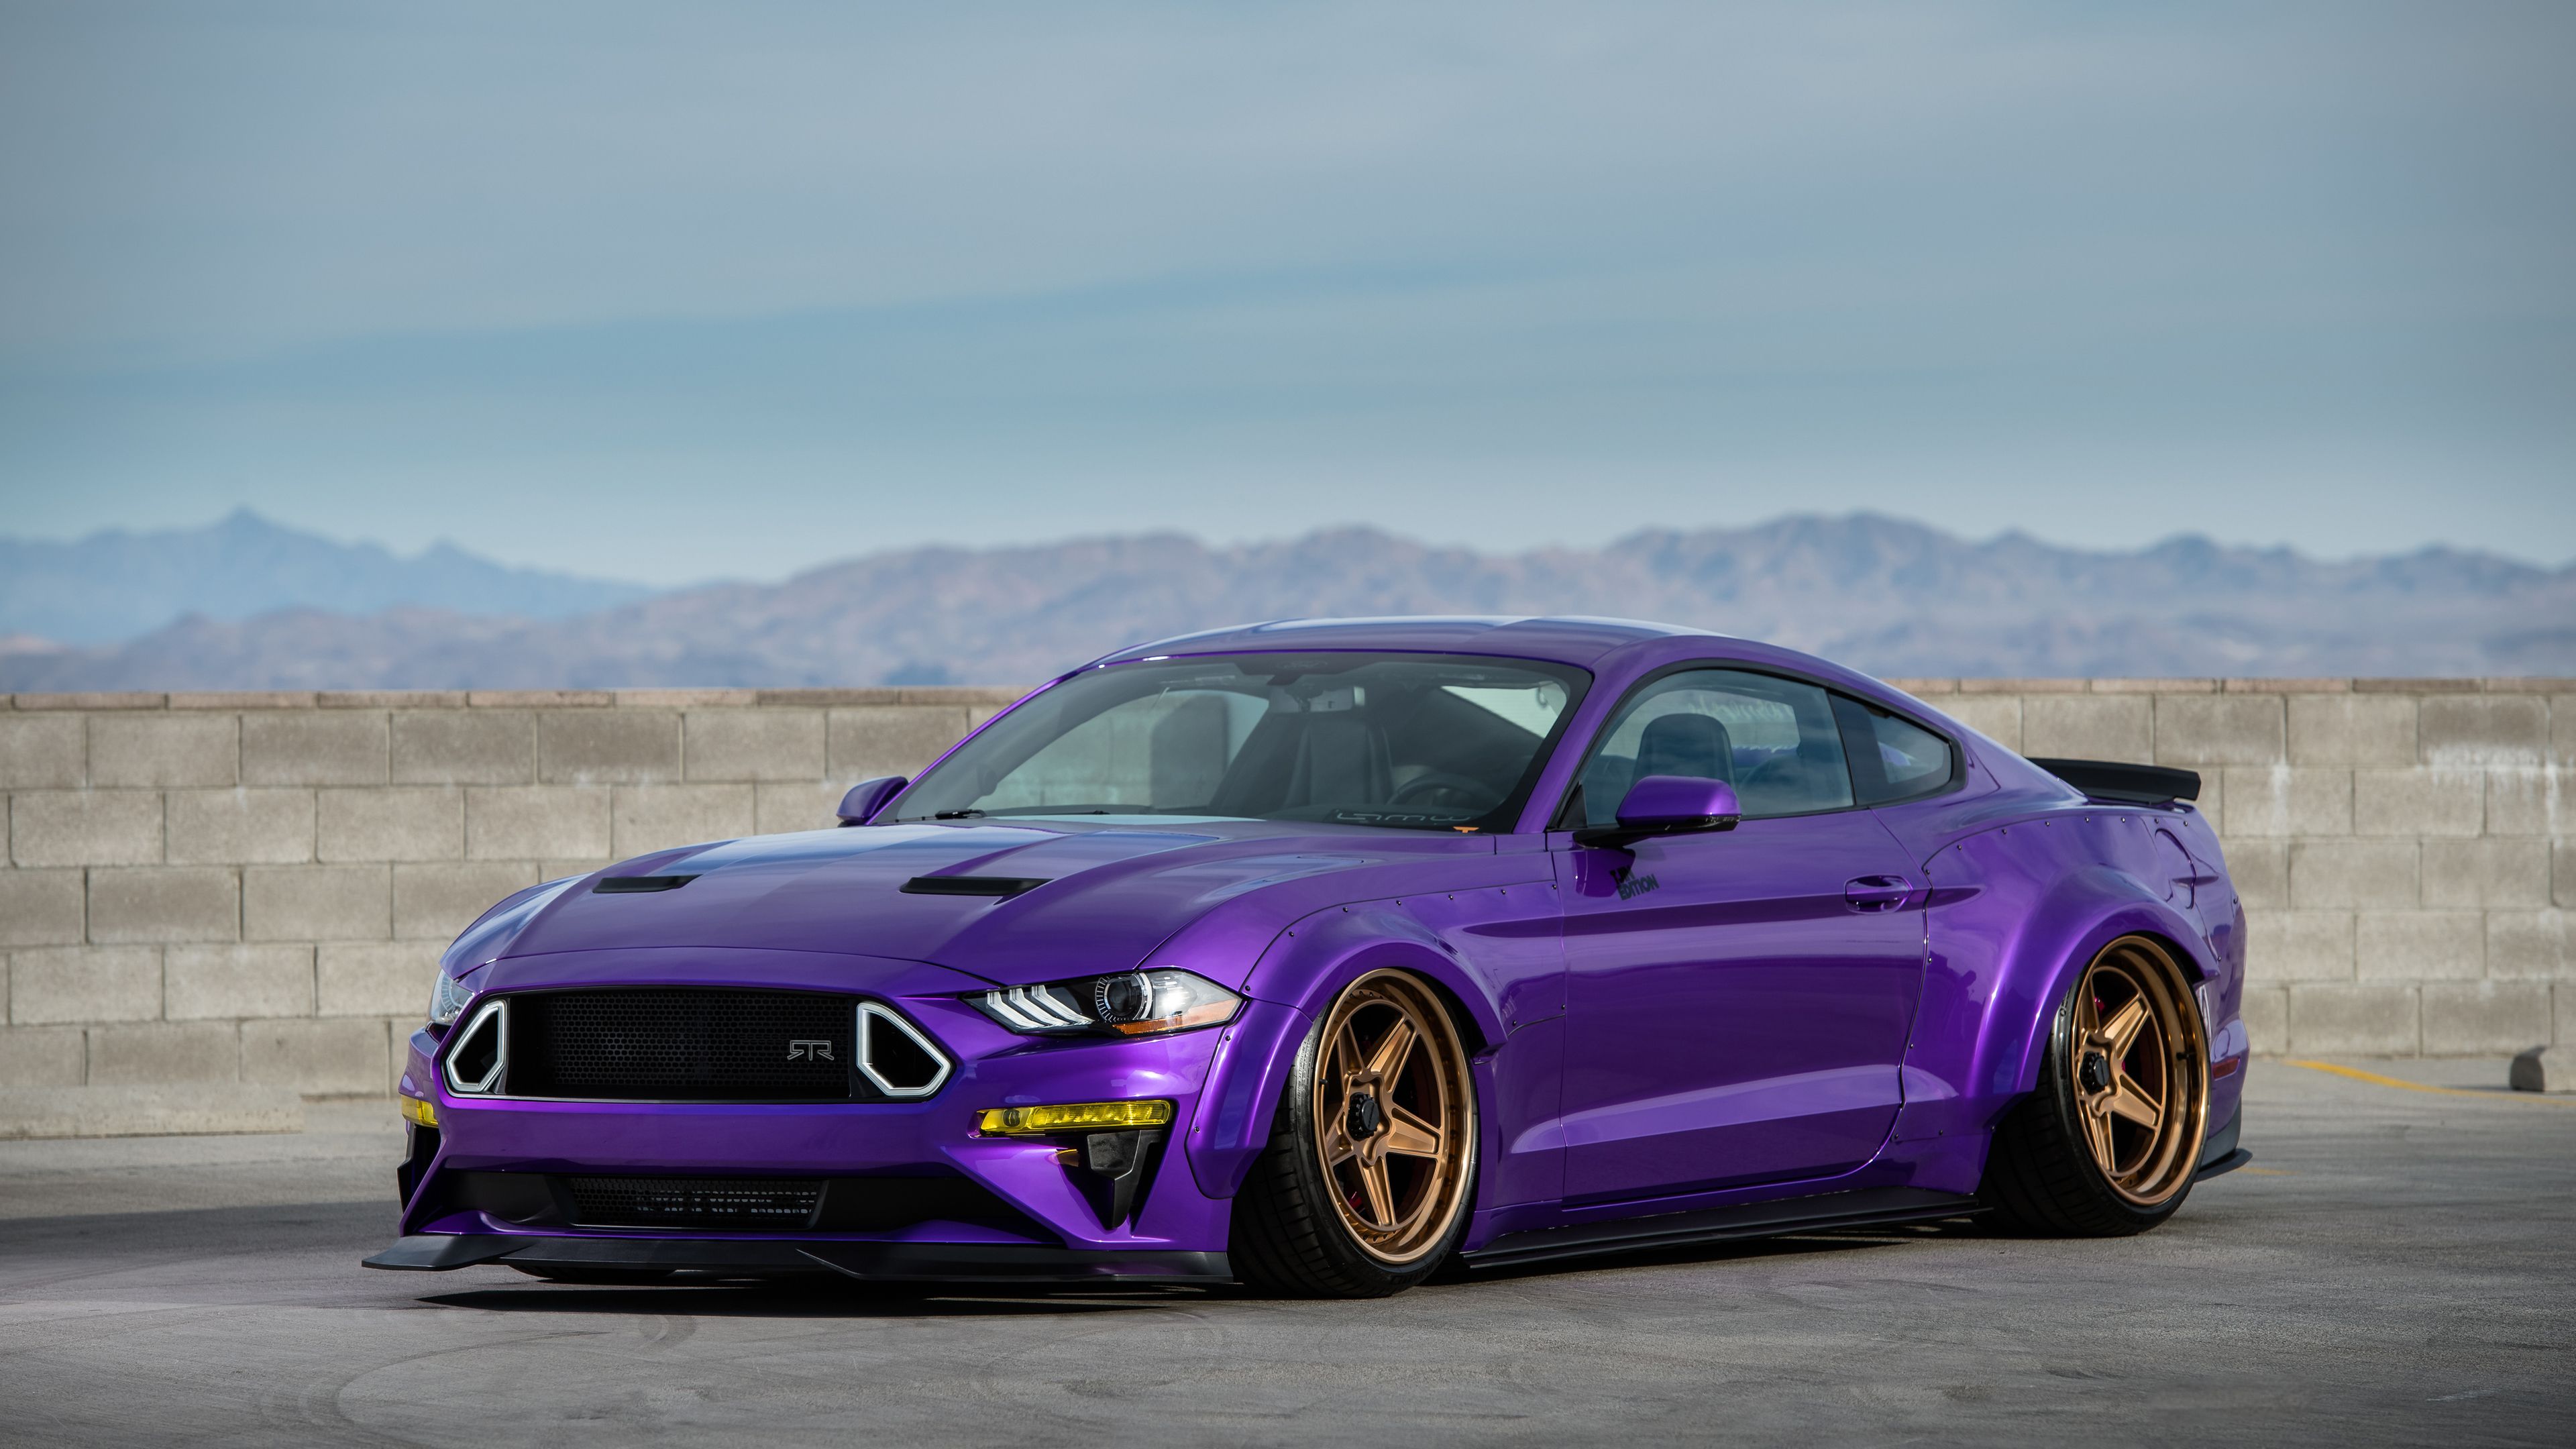 TJIN Edition Ford Mustang EcoBoost 4k wallpaper mustang wallpaper, hd- wallpaper, ford wallpaper, ford mustang. Mustang ecoboost, Ford mustang ecoboost, Mustang